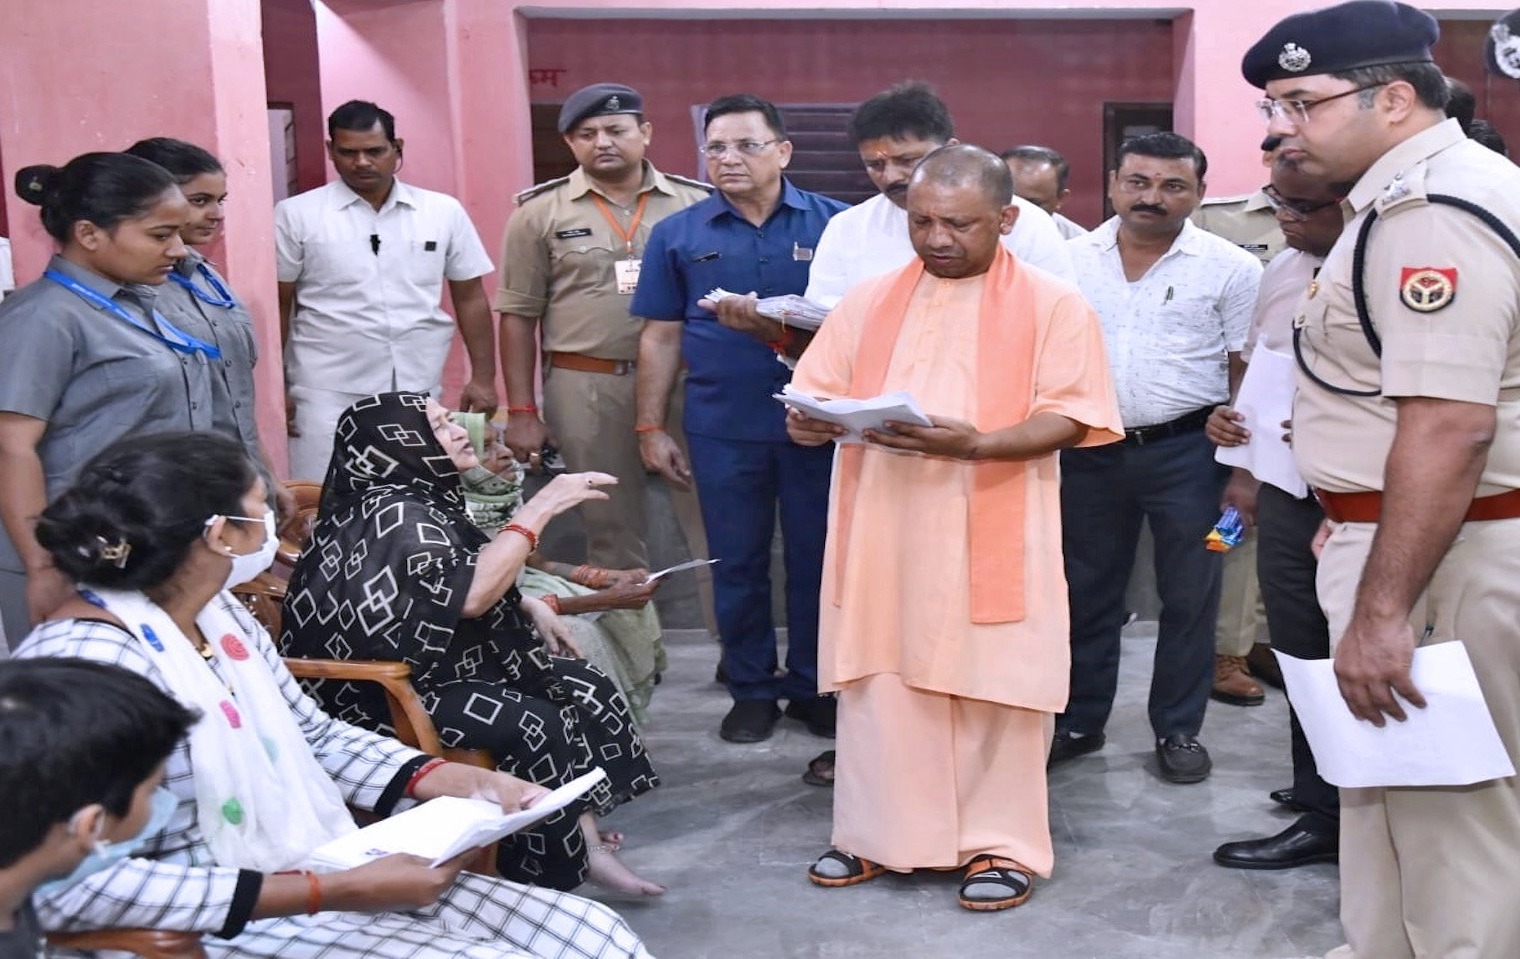 The Chief Minister listened to the complaints of the people in the public darshan